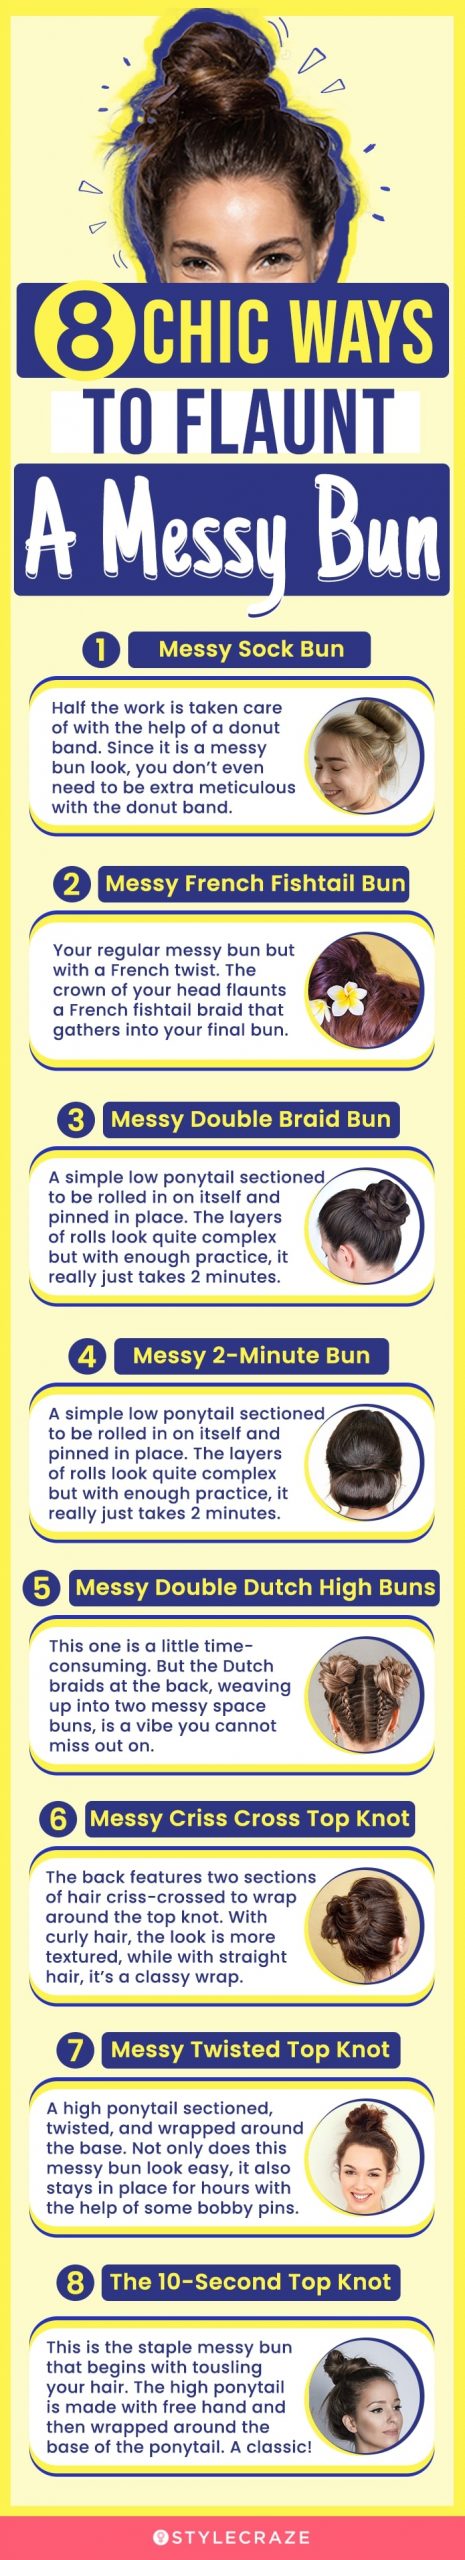 8 chic ways to flaunt a messy bun (infographic)